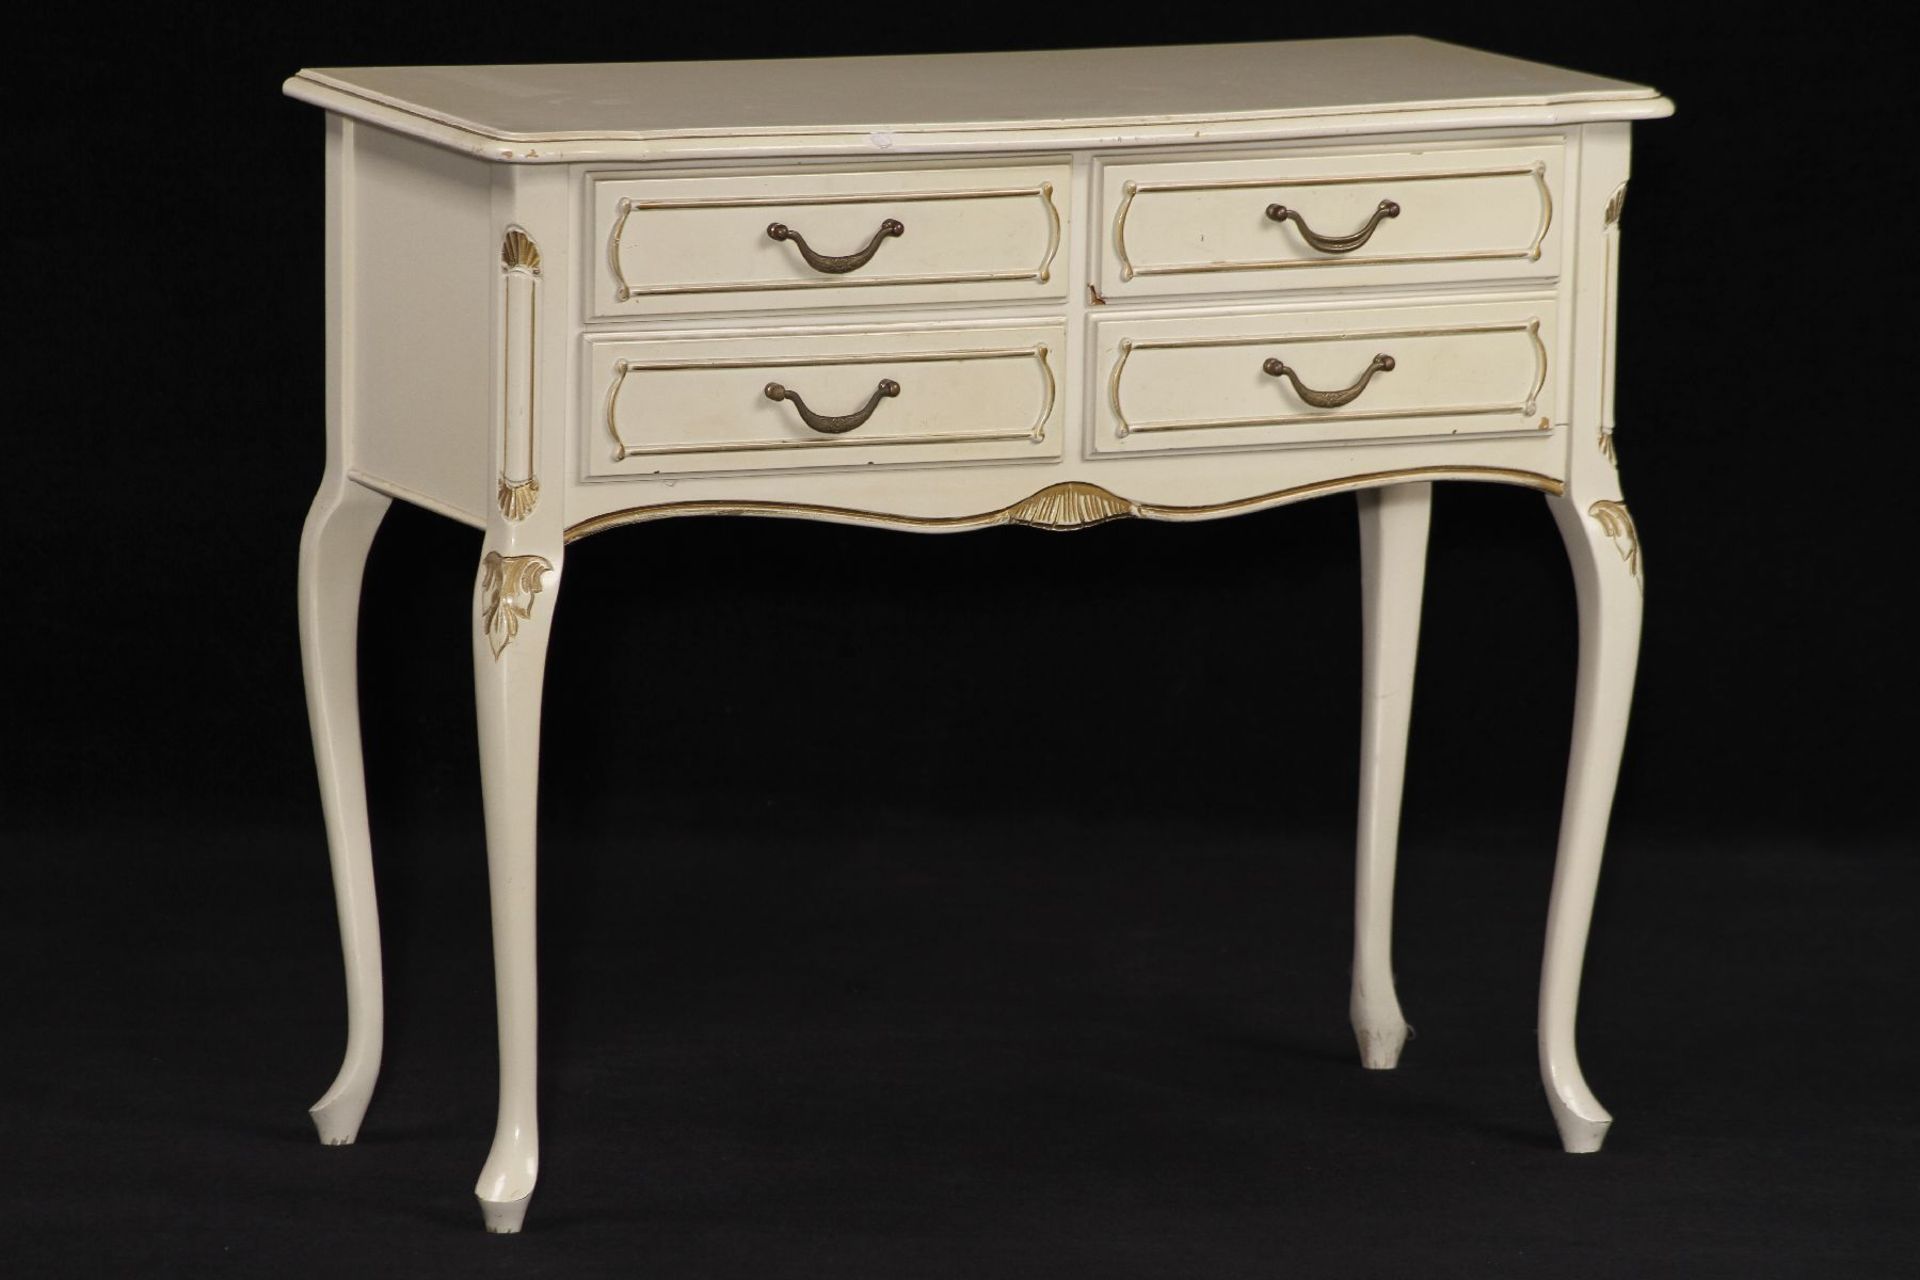 Chest of drawers, in baroque style, solid wood, white sanding lacquer, 4 drawers, metal handles,